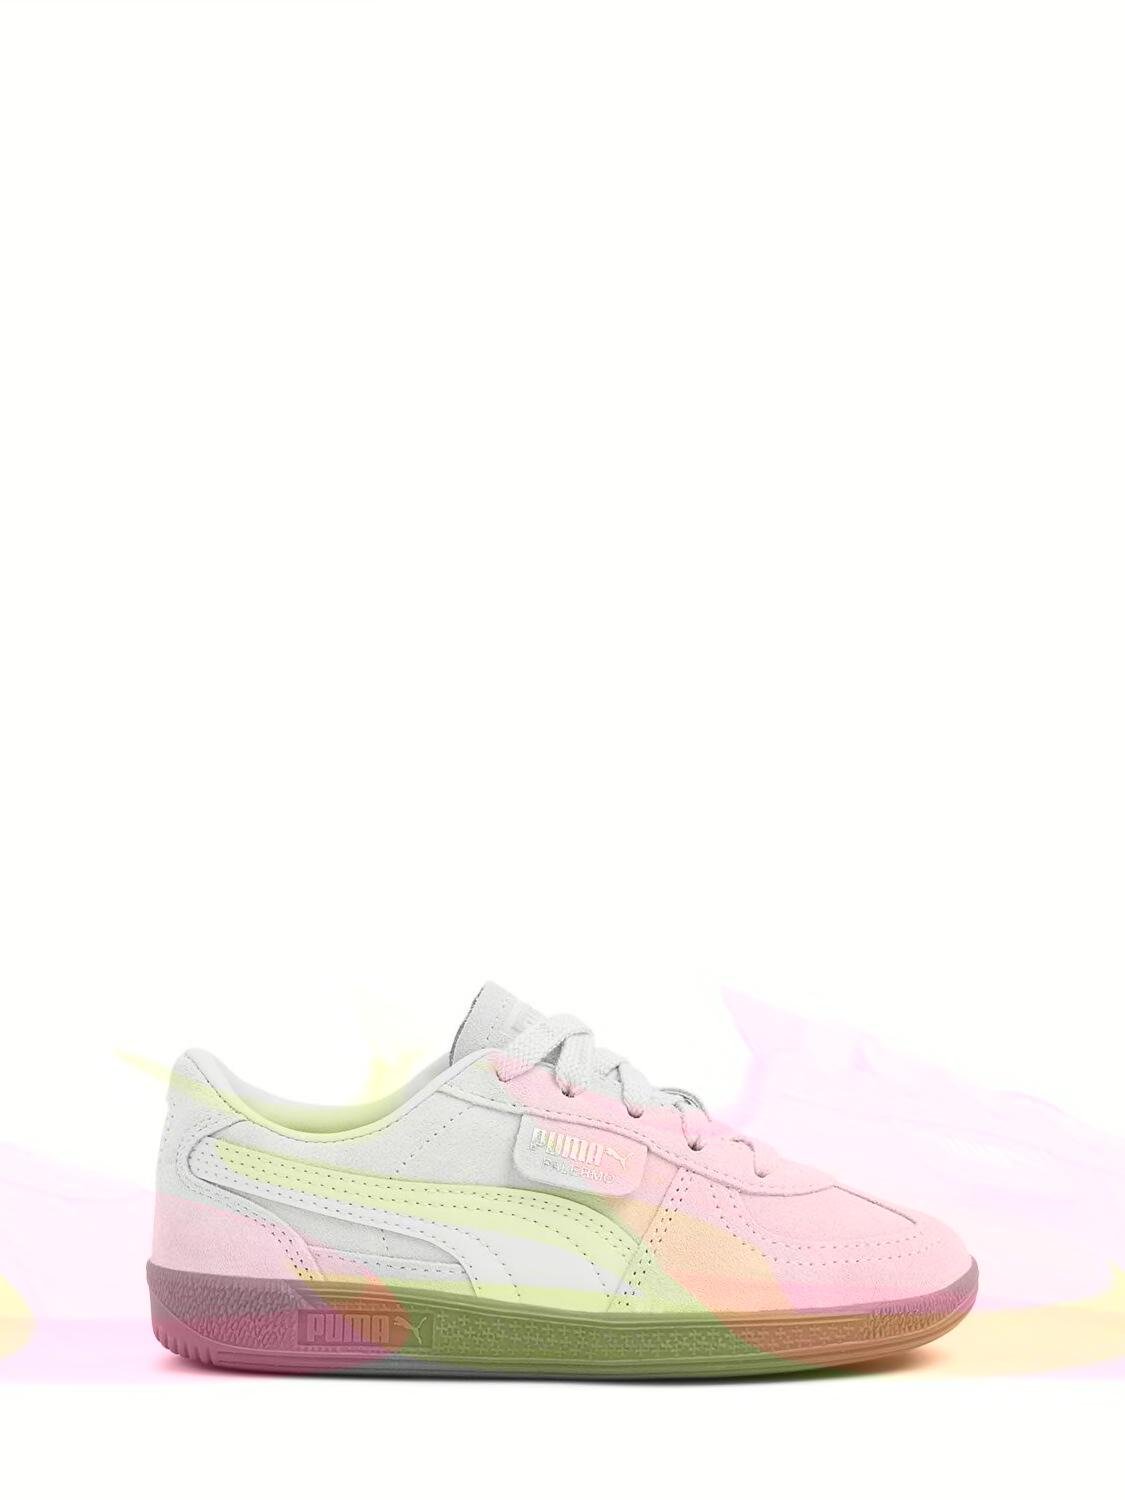 Palermo Sneakers by PUMA